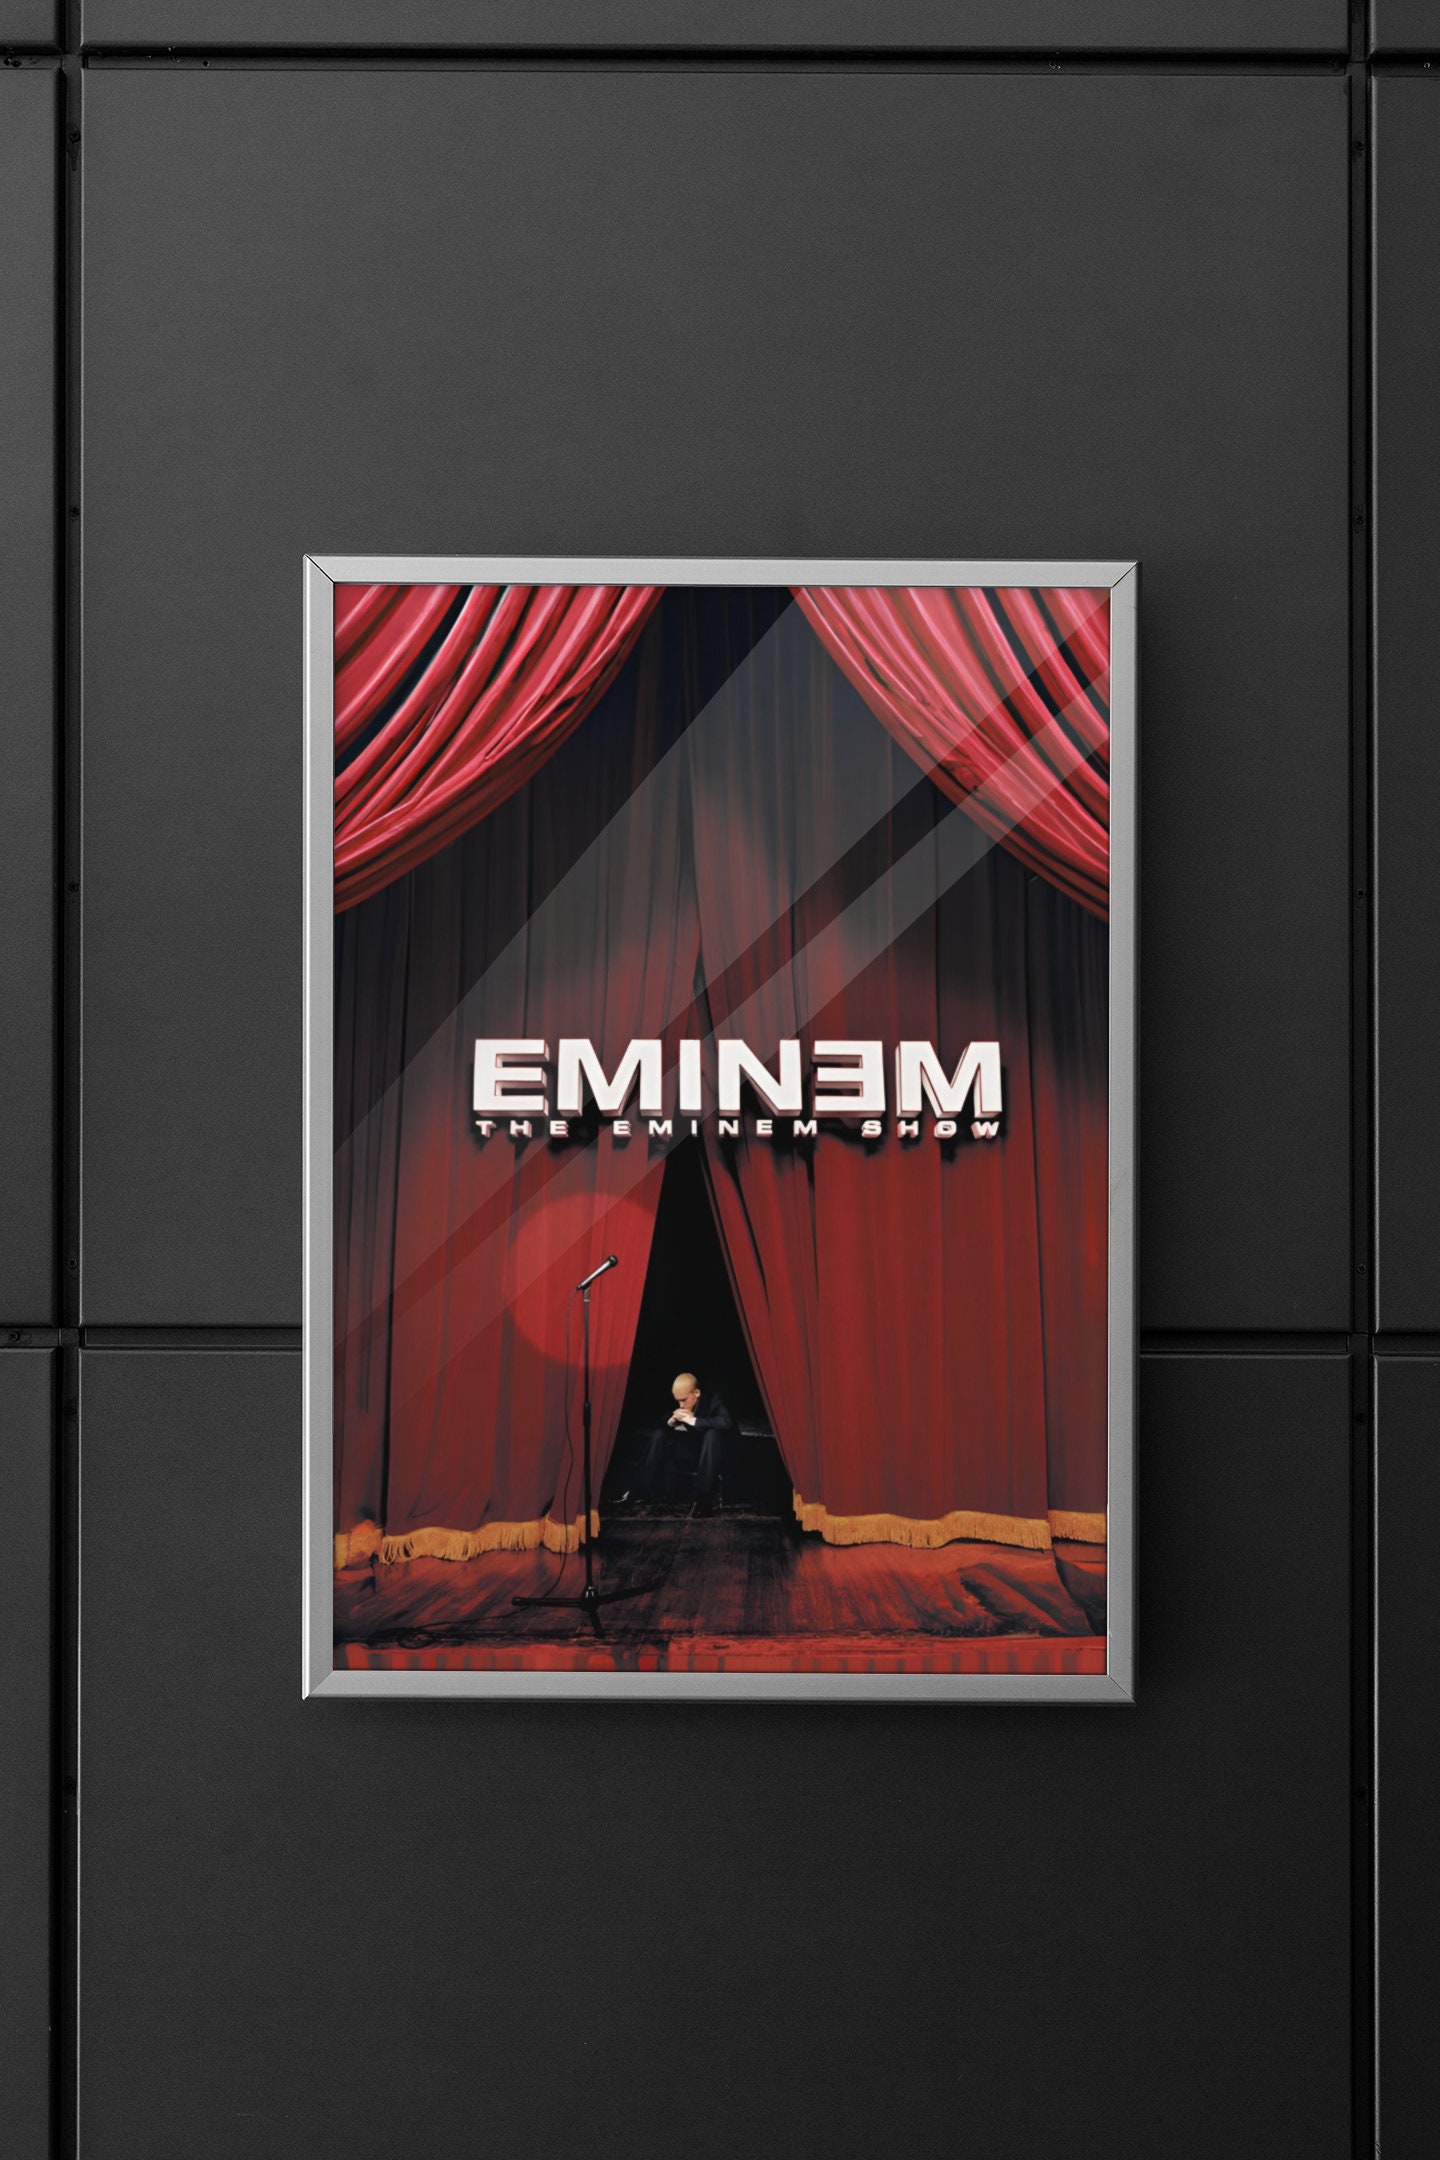 EMINEM IN CONCERT - PAY PER VIEW POSTER - EMINEM INVADES YOUR HOME